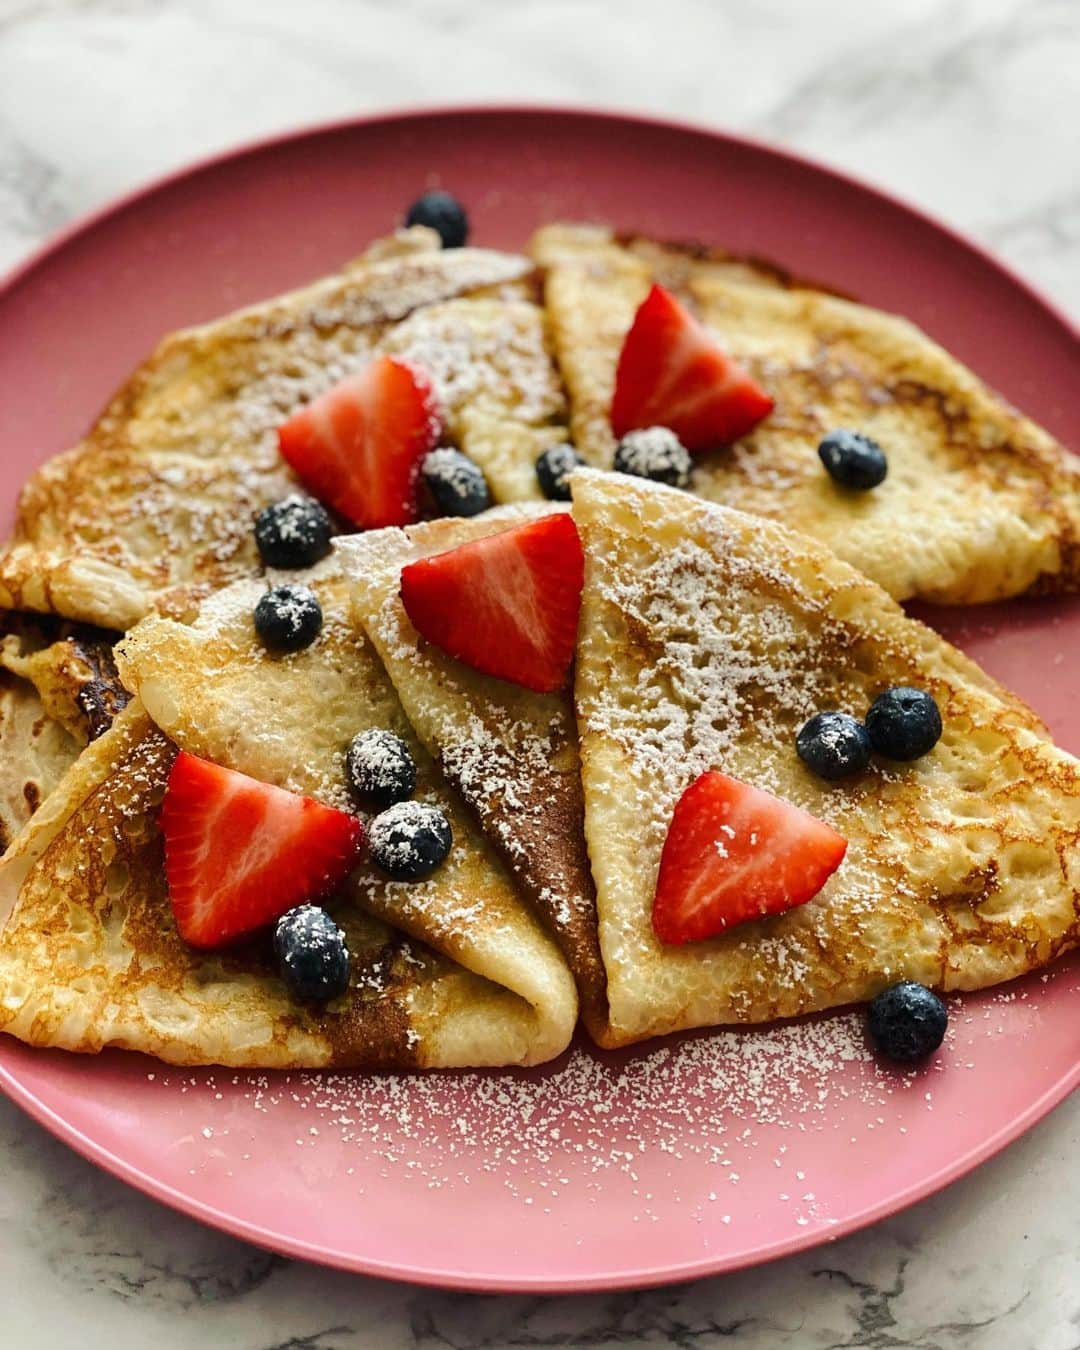 Antonietteのインスタグラム：「This week has been flying by! Thursday has already crêpe’d up on us. 🤓 Love using my crêpe pan which is so versatile, even use it to warm up tortillas. The kids love crêpes because they can fill them with anything, but I prefer them plain with butter and sugar. So good! 😋 Recipe below.」